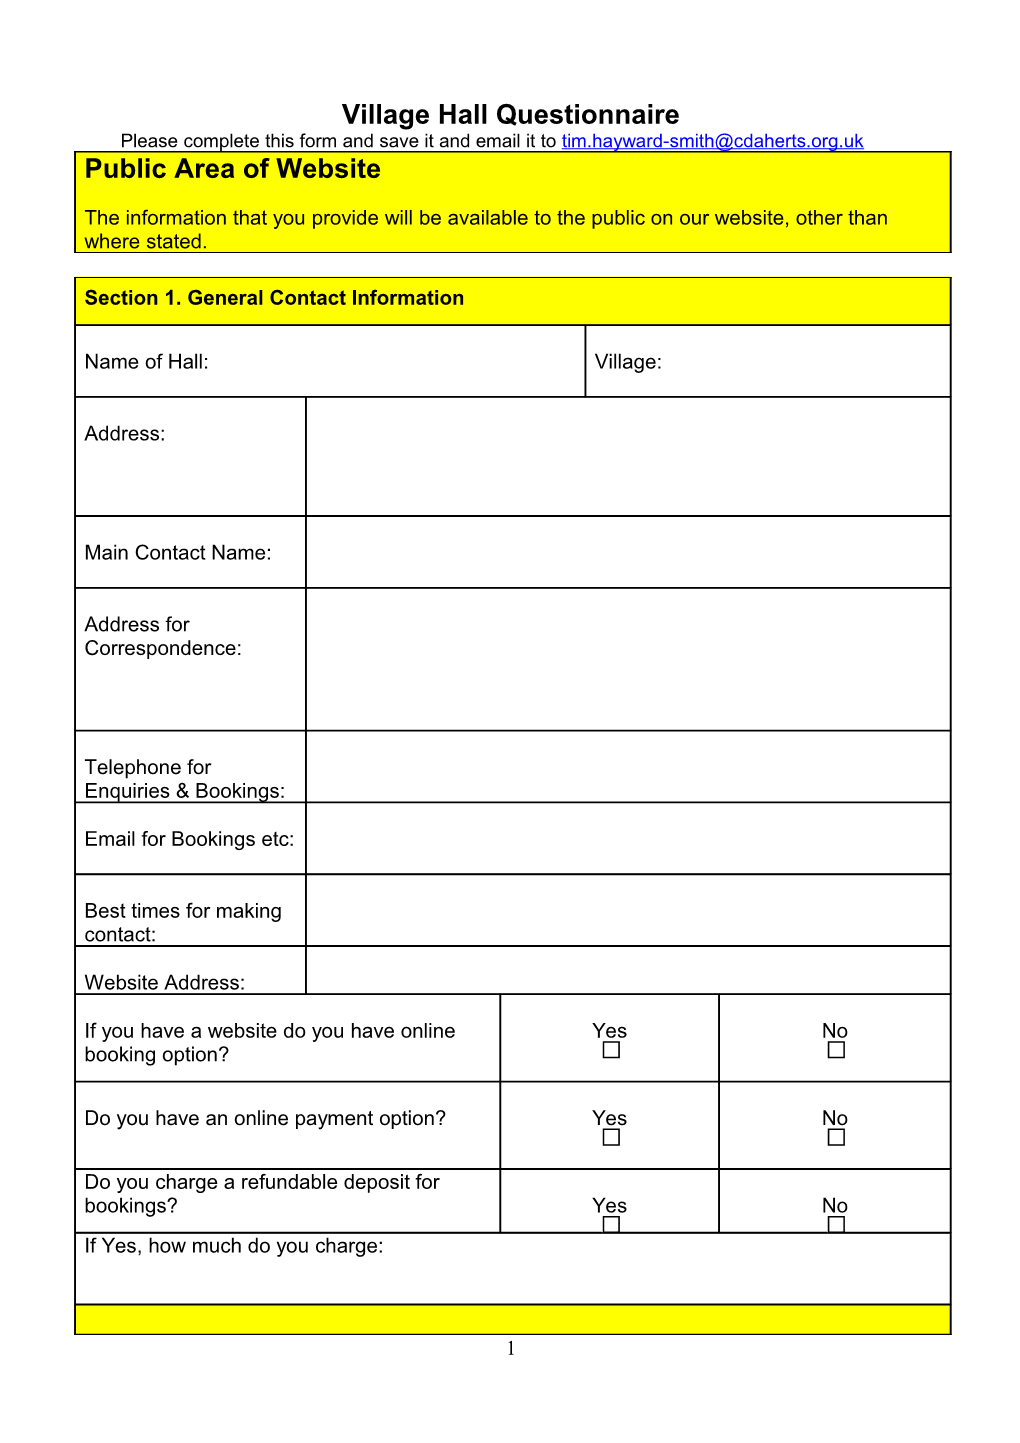 Please Complete This Form and Save It and Email It To